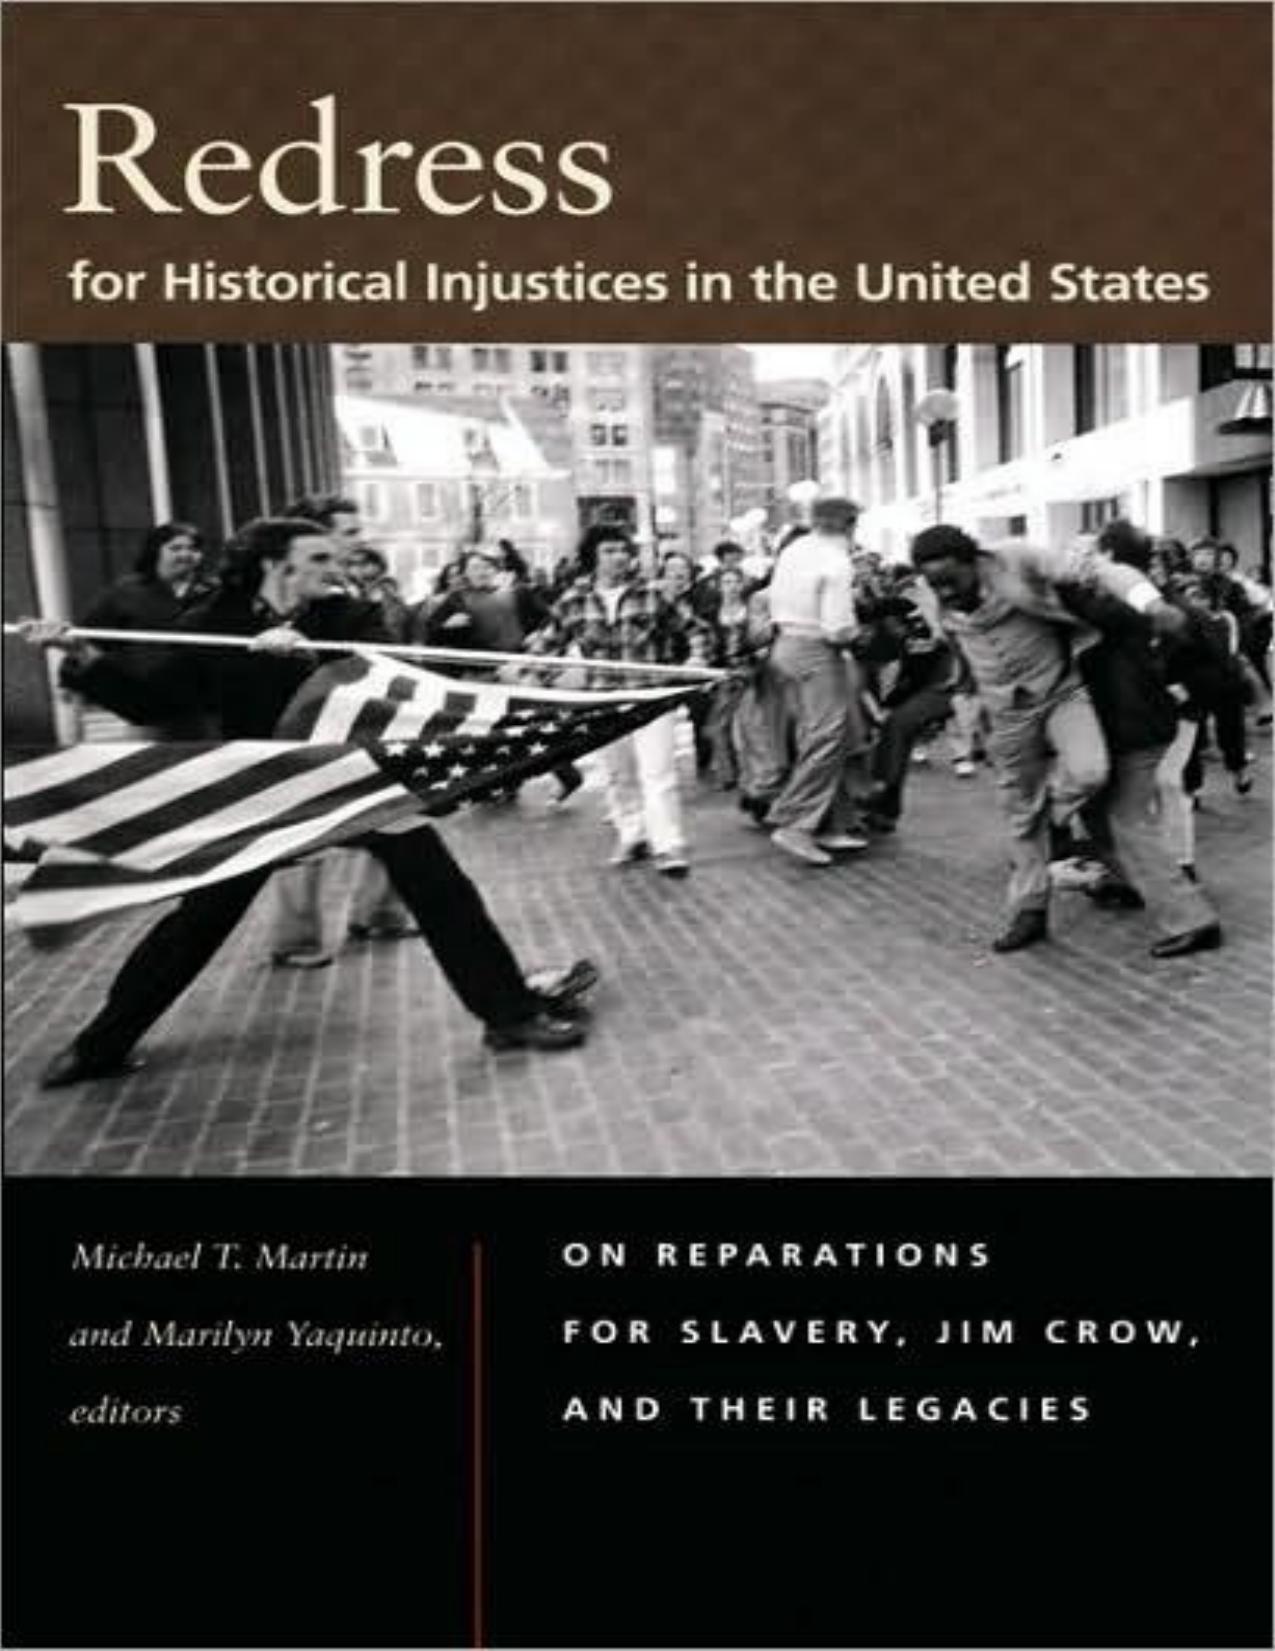 Redress for Historical Injustices in the United States: On Reparations for Slavery, Jim Crow, and Their Legacies by Michael T. Martin & Marilyn Yaquinto